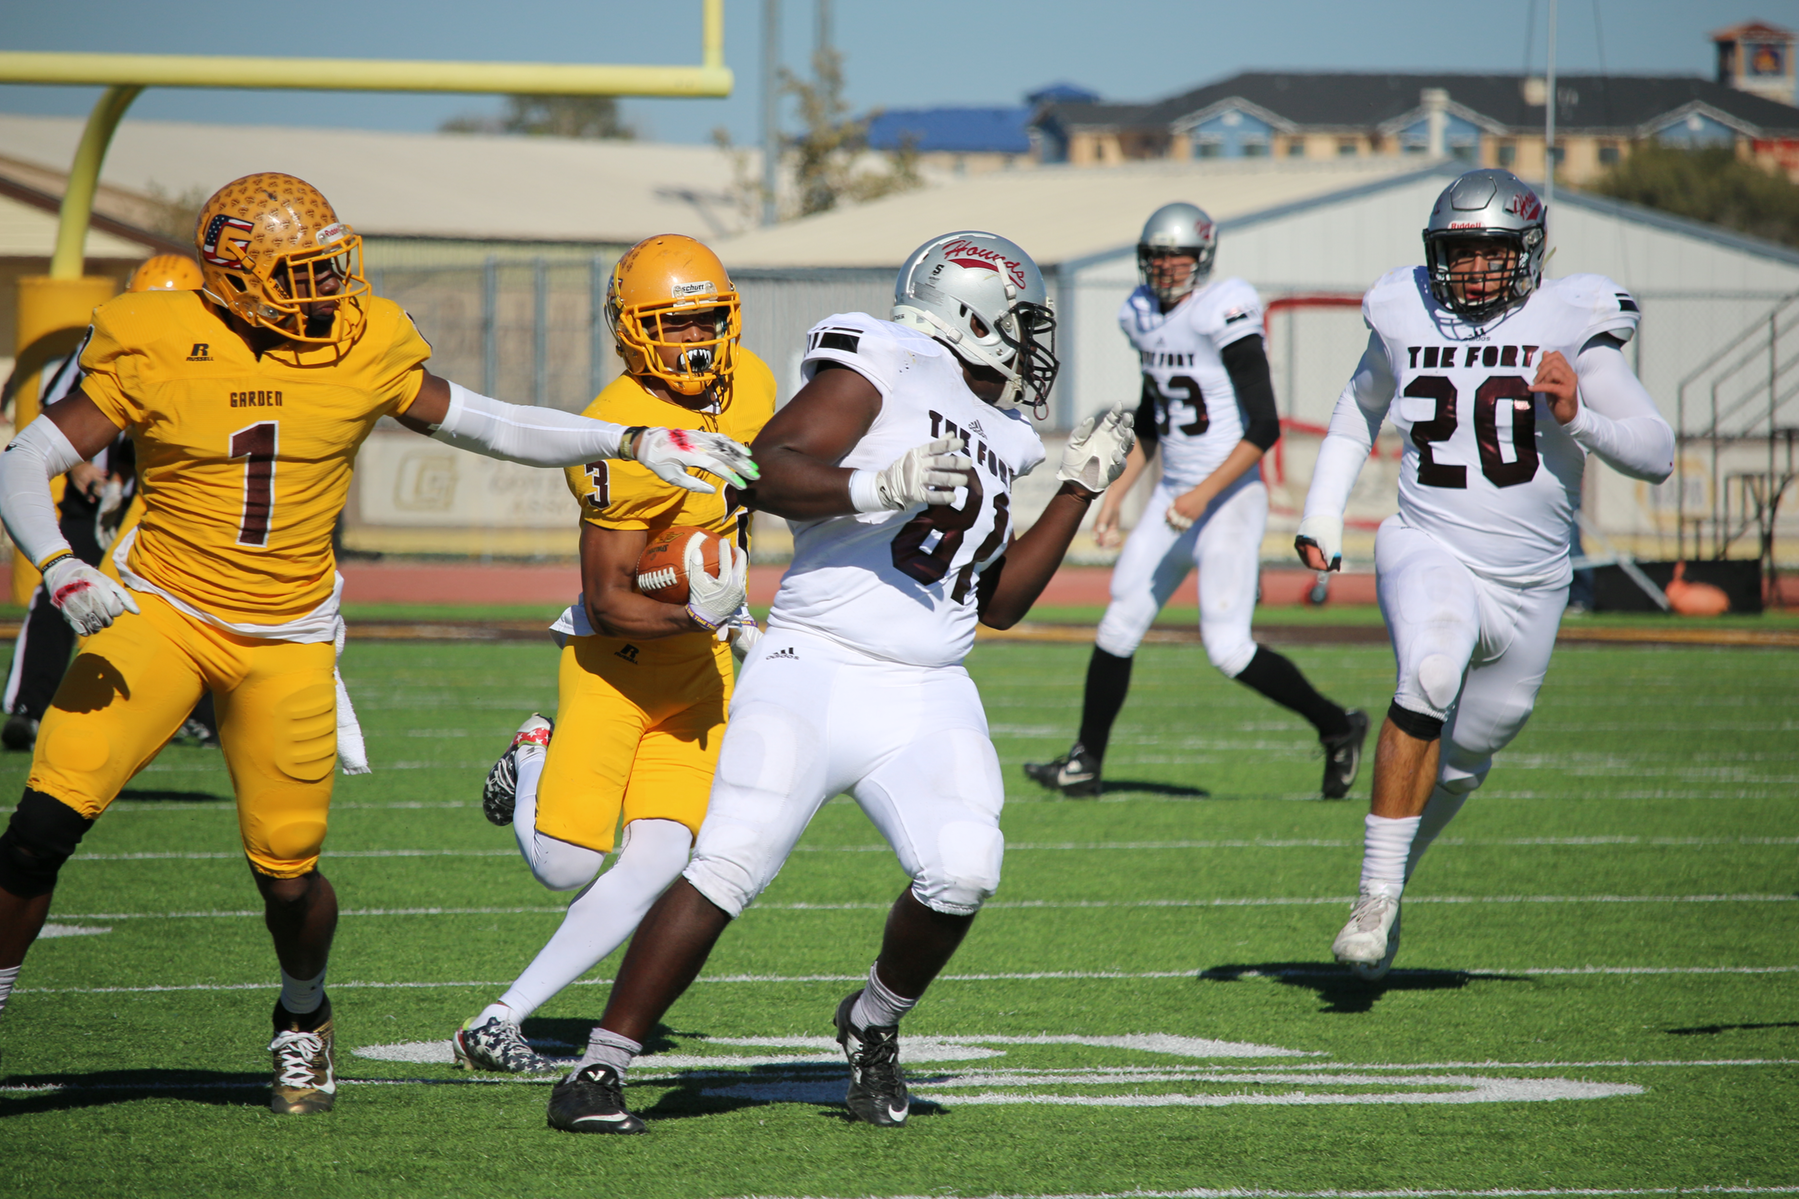 Broncbusters stomp Iowa Central; remain unbeaten